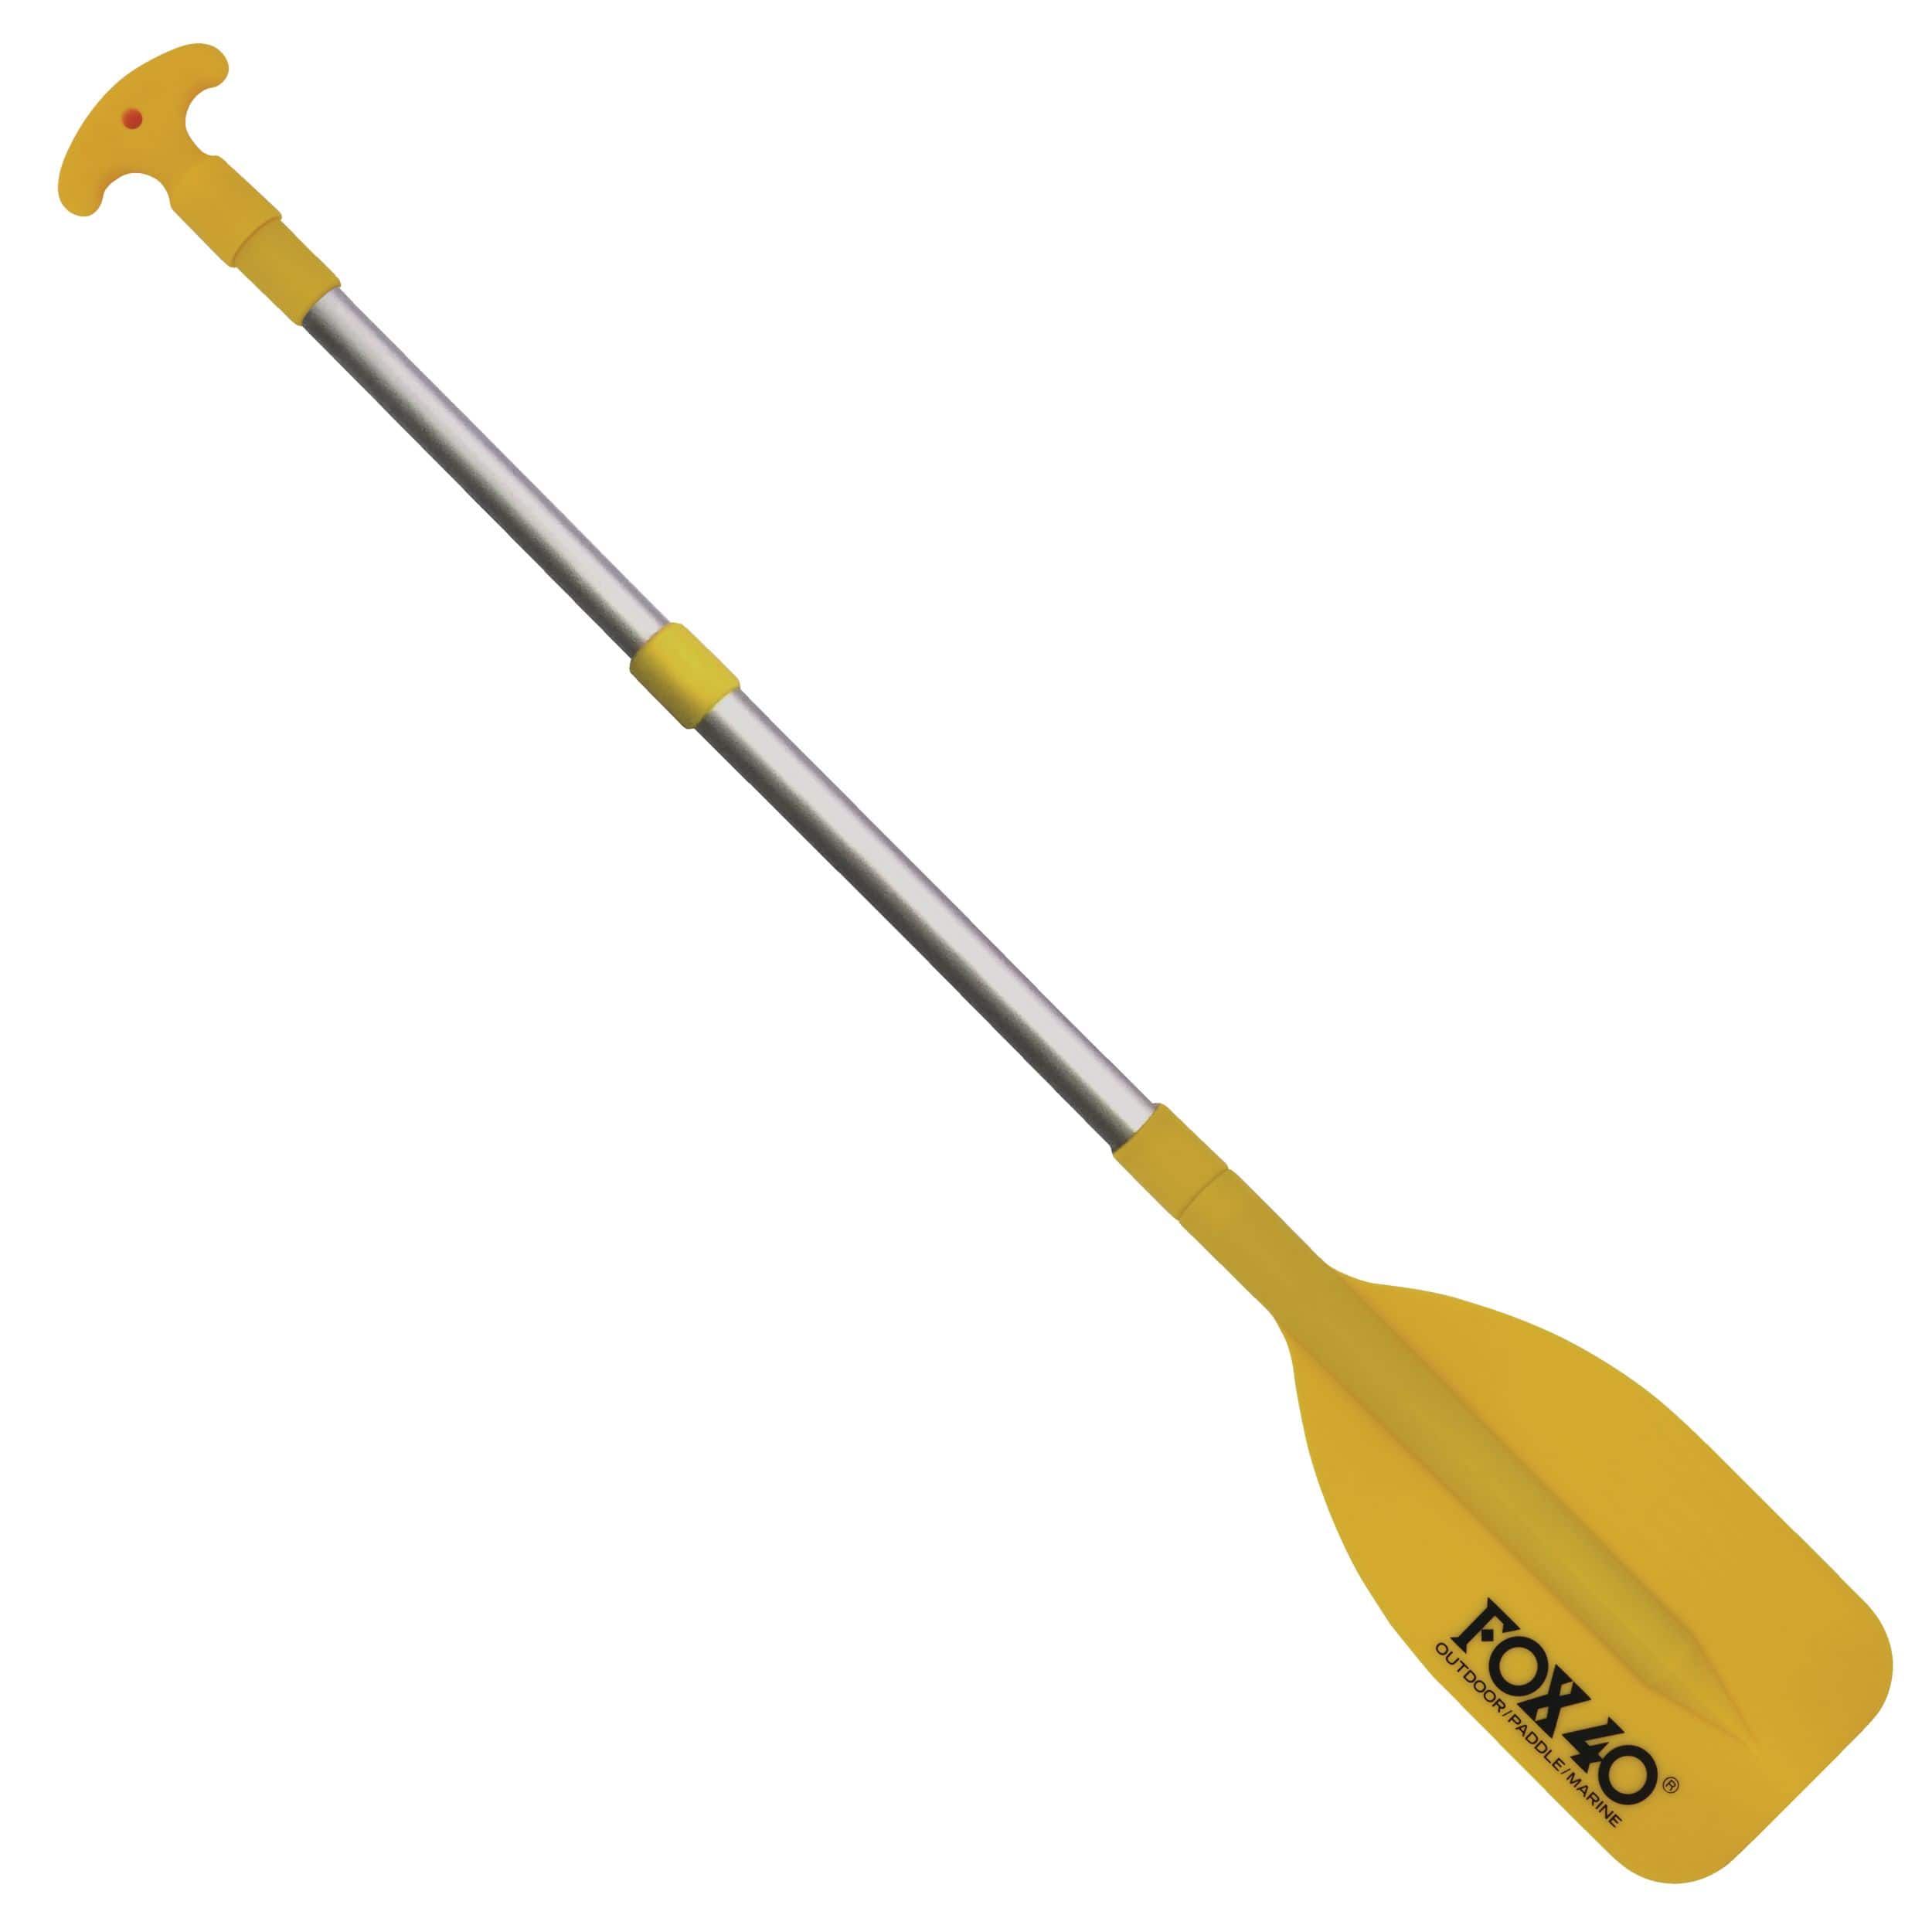 Fox 40 Adjustable Telescopic Mini Paddle with Hook, Yellow, 21 to 42